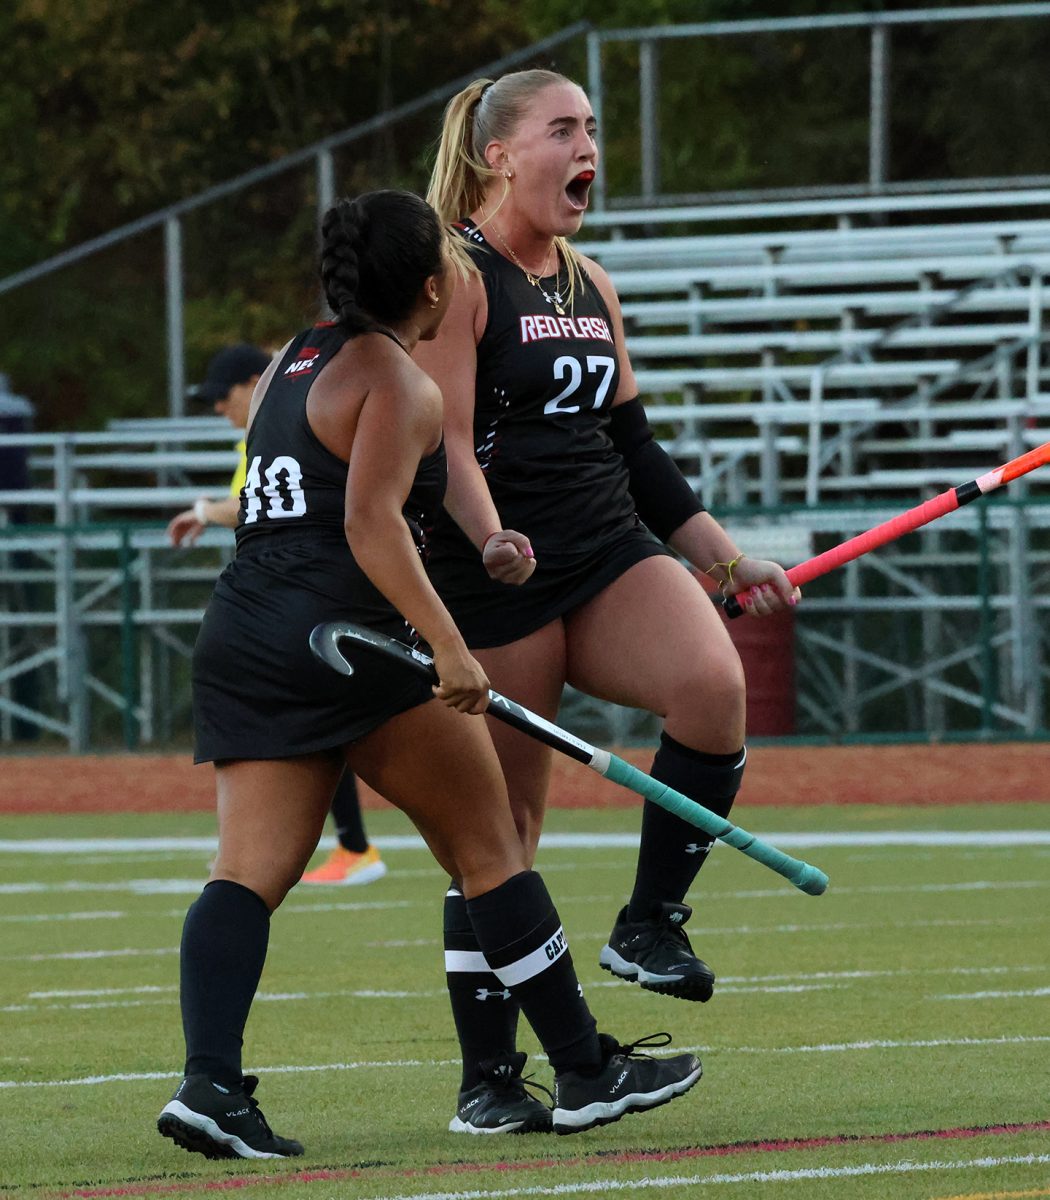 Field Hockey Wins Thriller Over LIU, Now 4-0 at Home